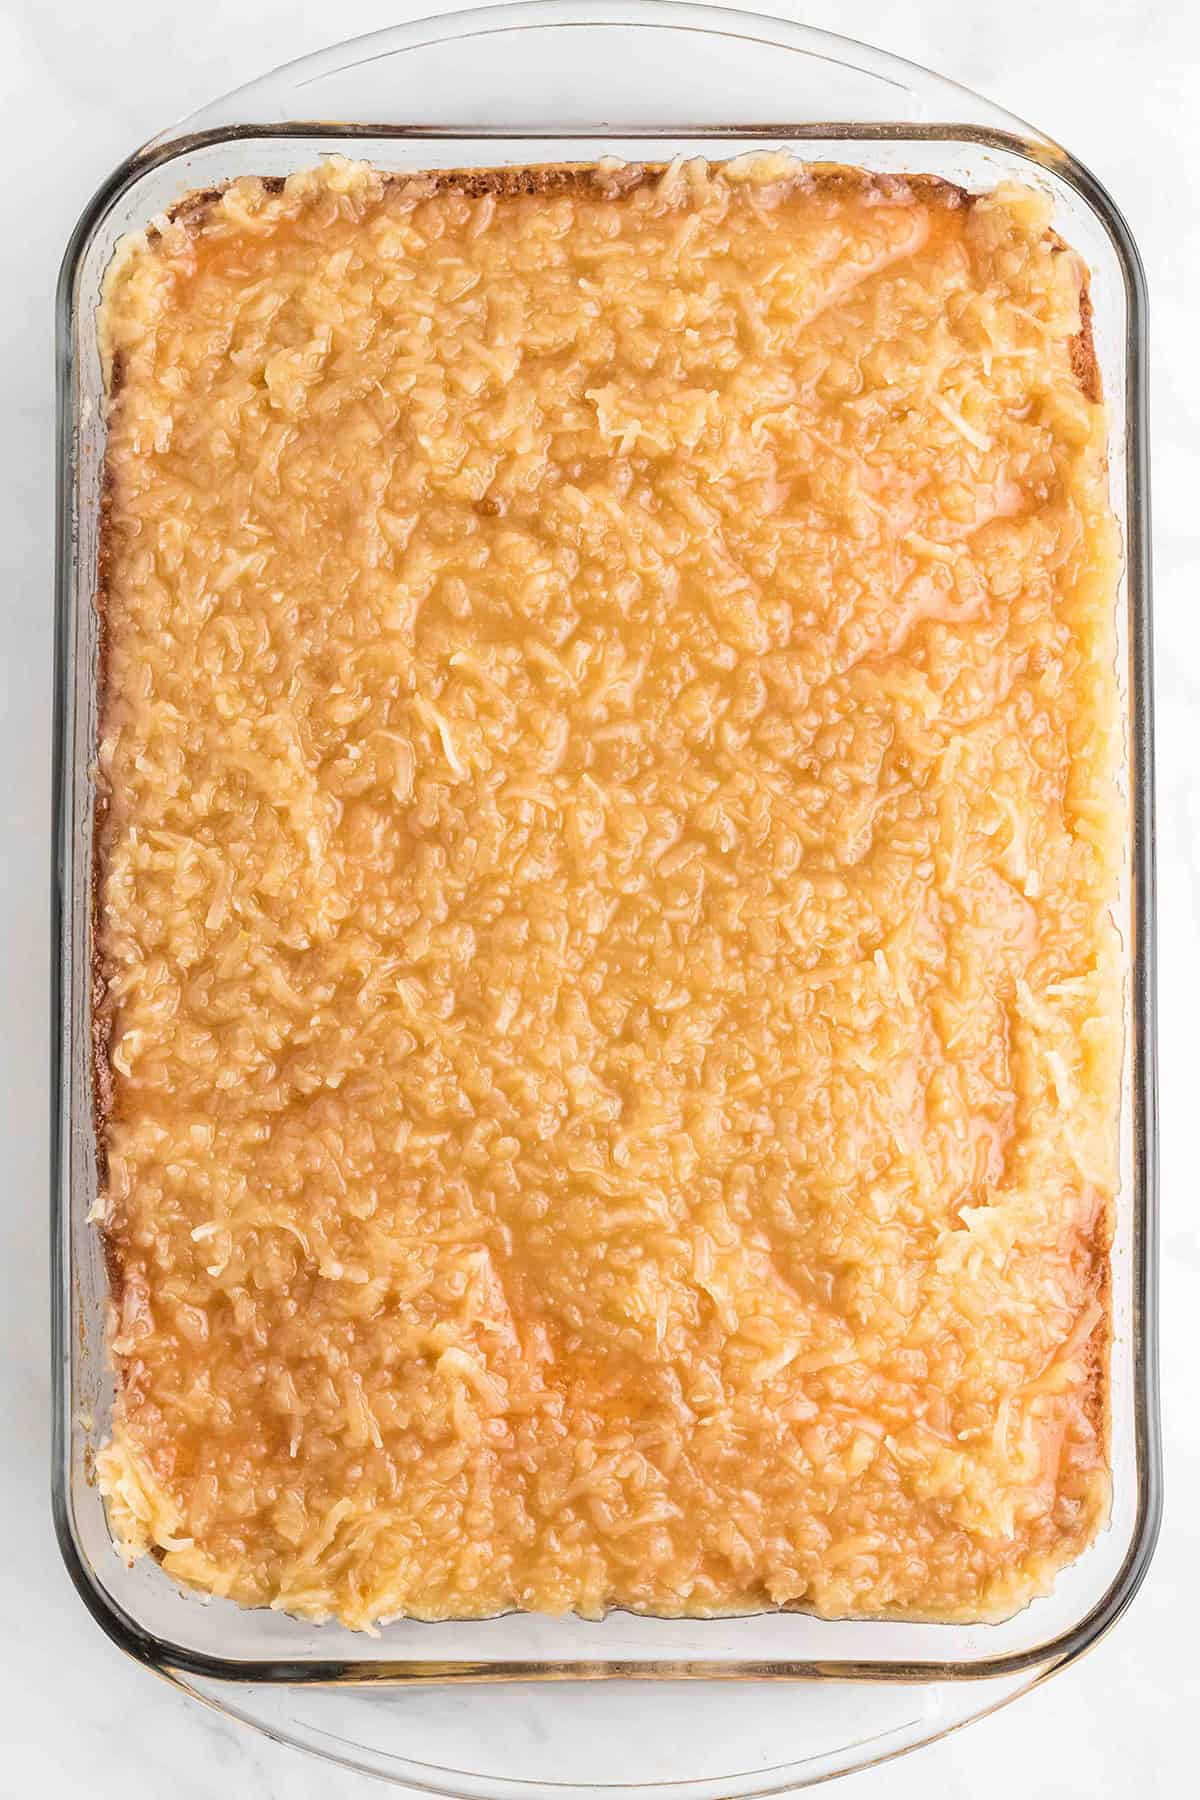 Coconut topping spread over baked cake layer.